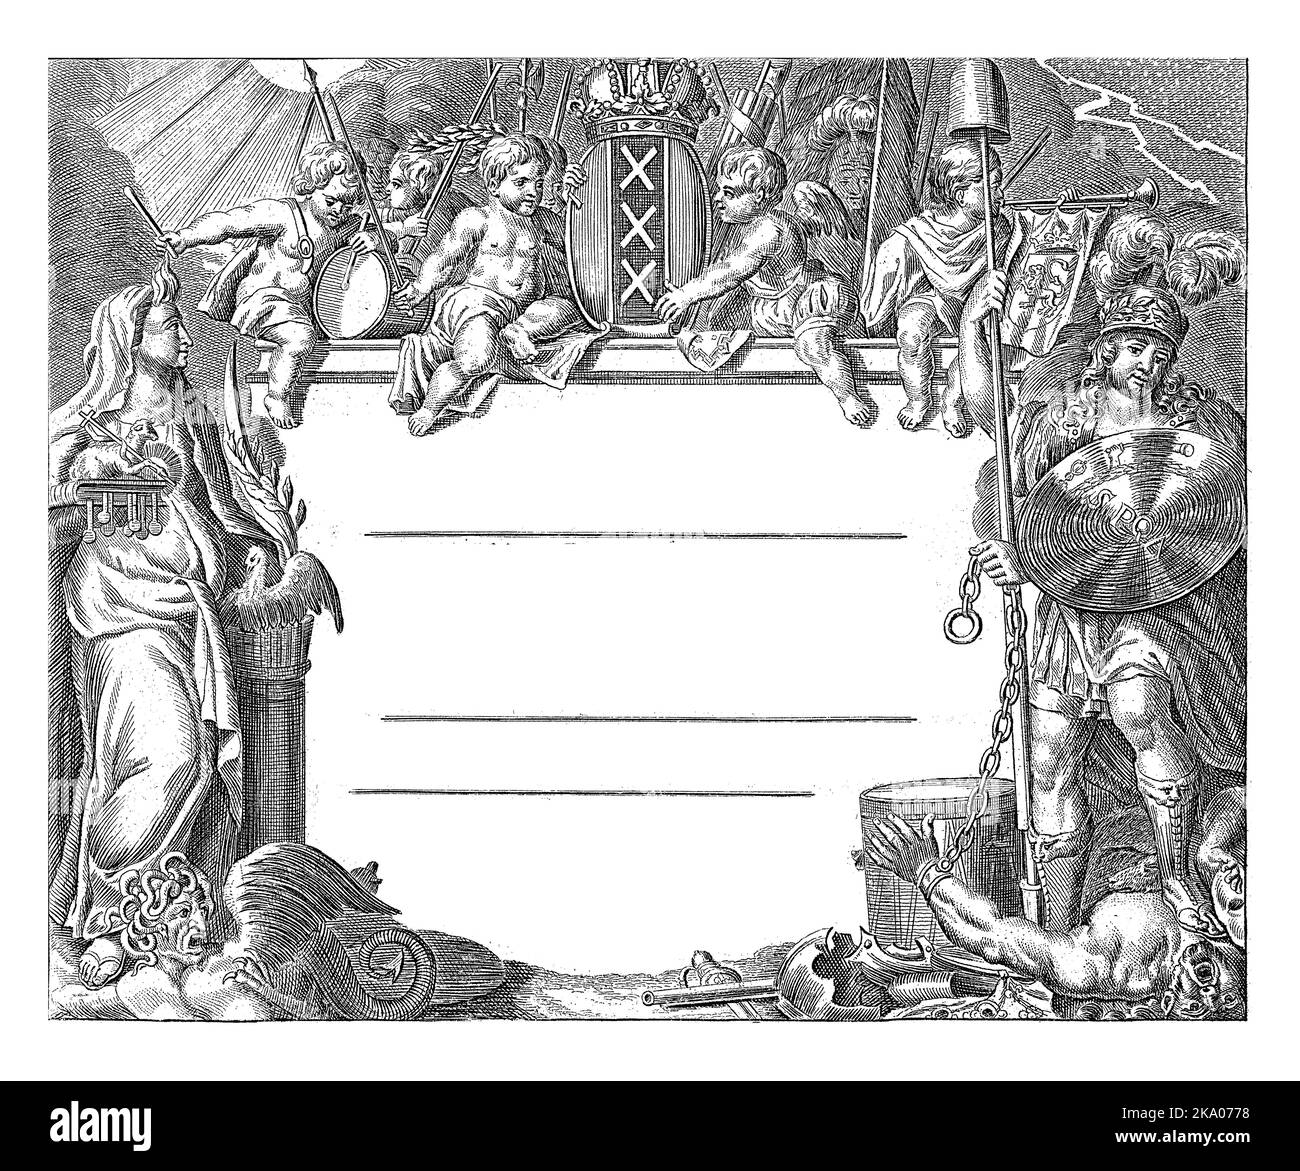 Shooter's letter with personification of the city maiden of Amsterdam trampling a prisoner in chains and personification of faith trampling heresy. Stock Photo